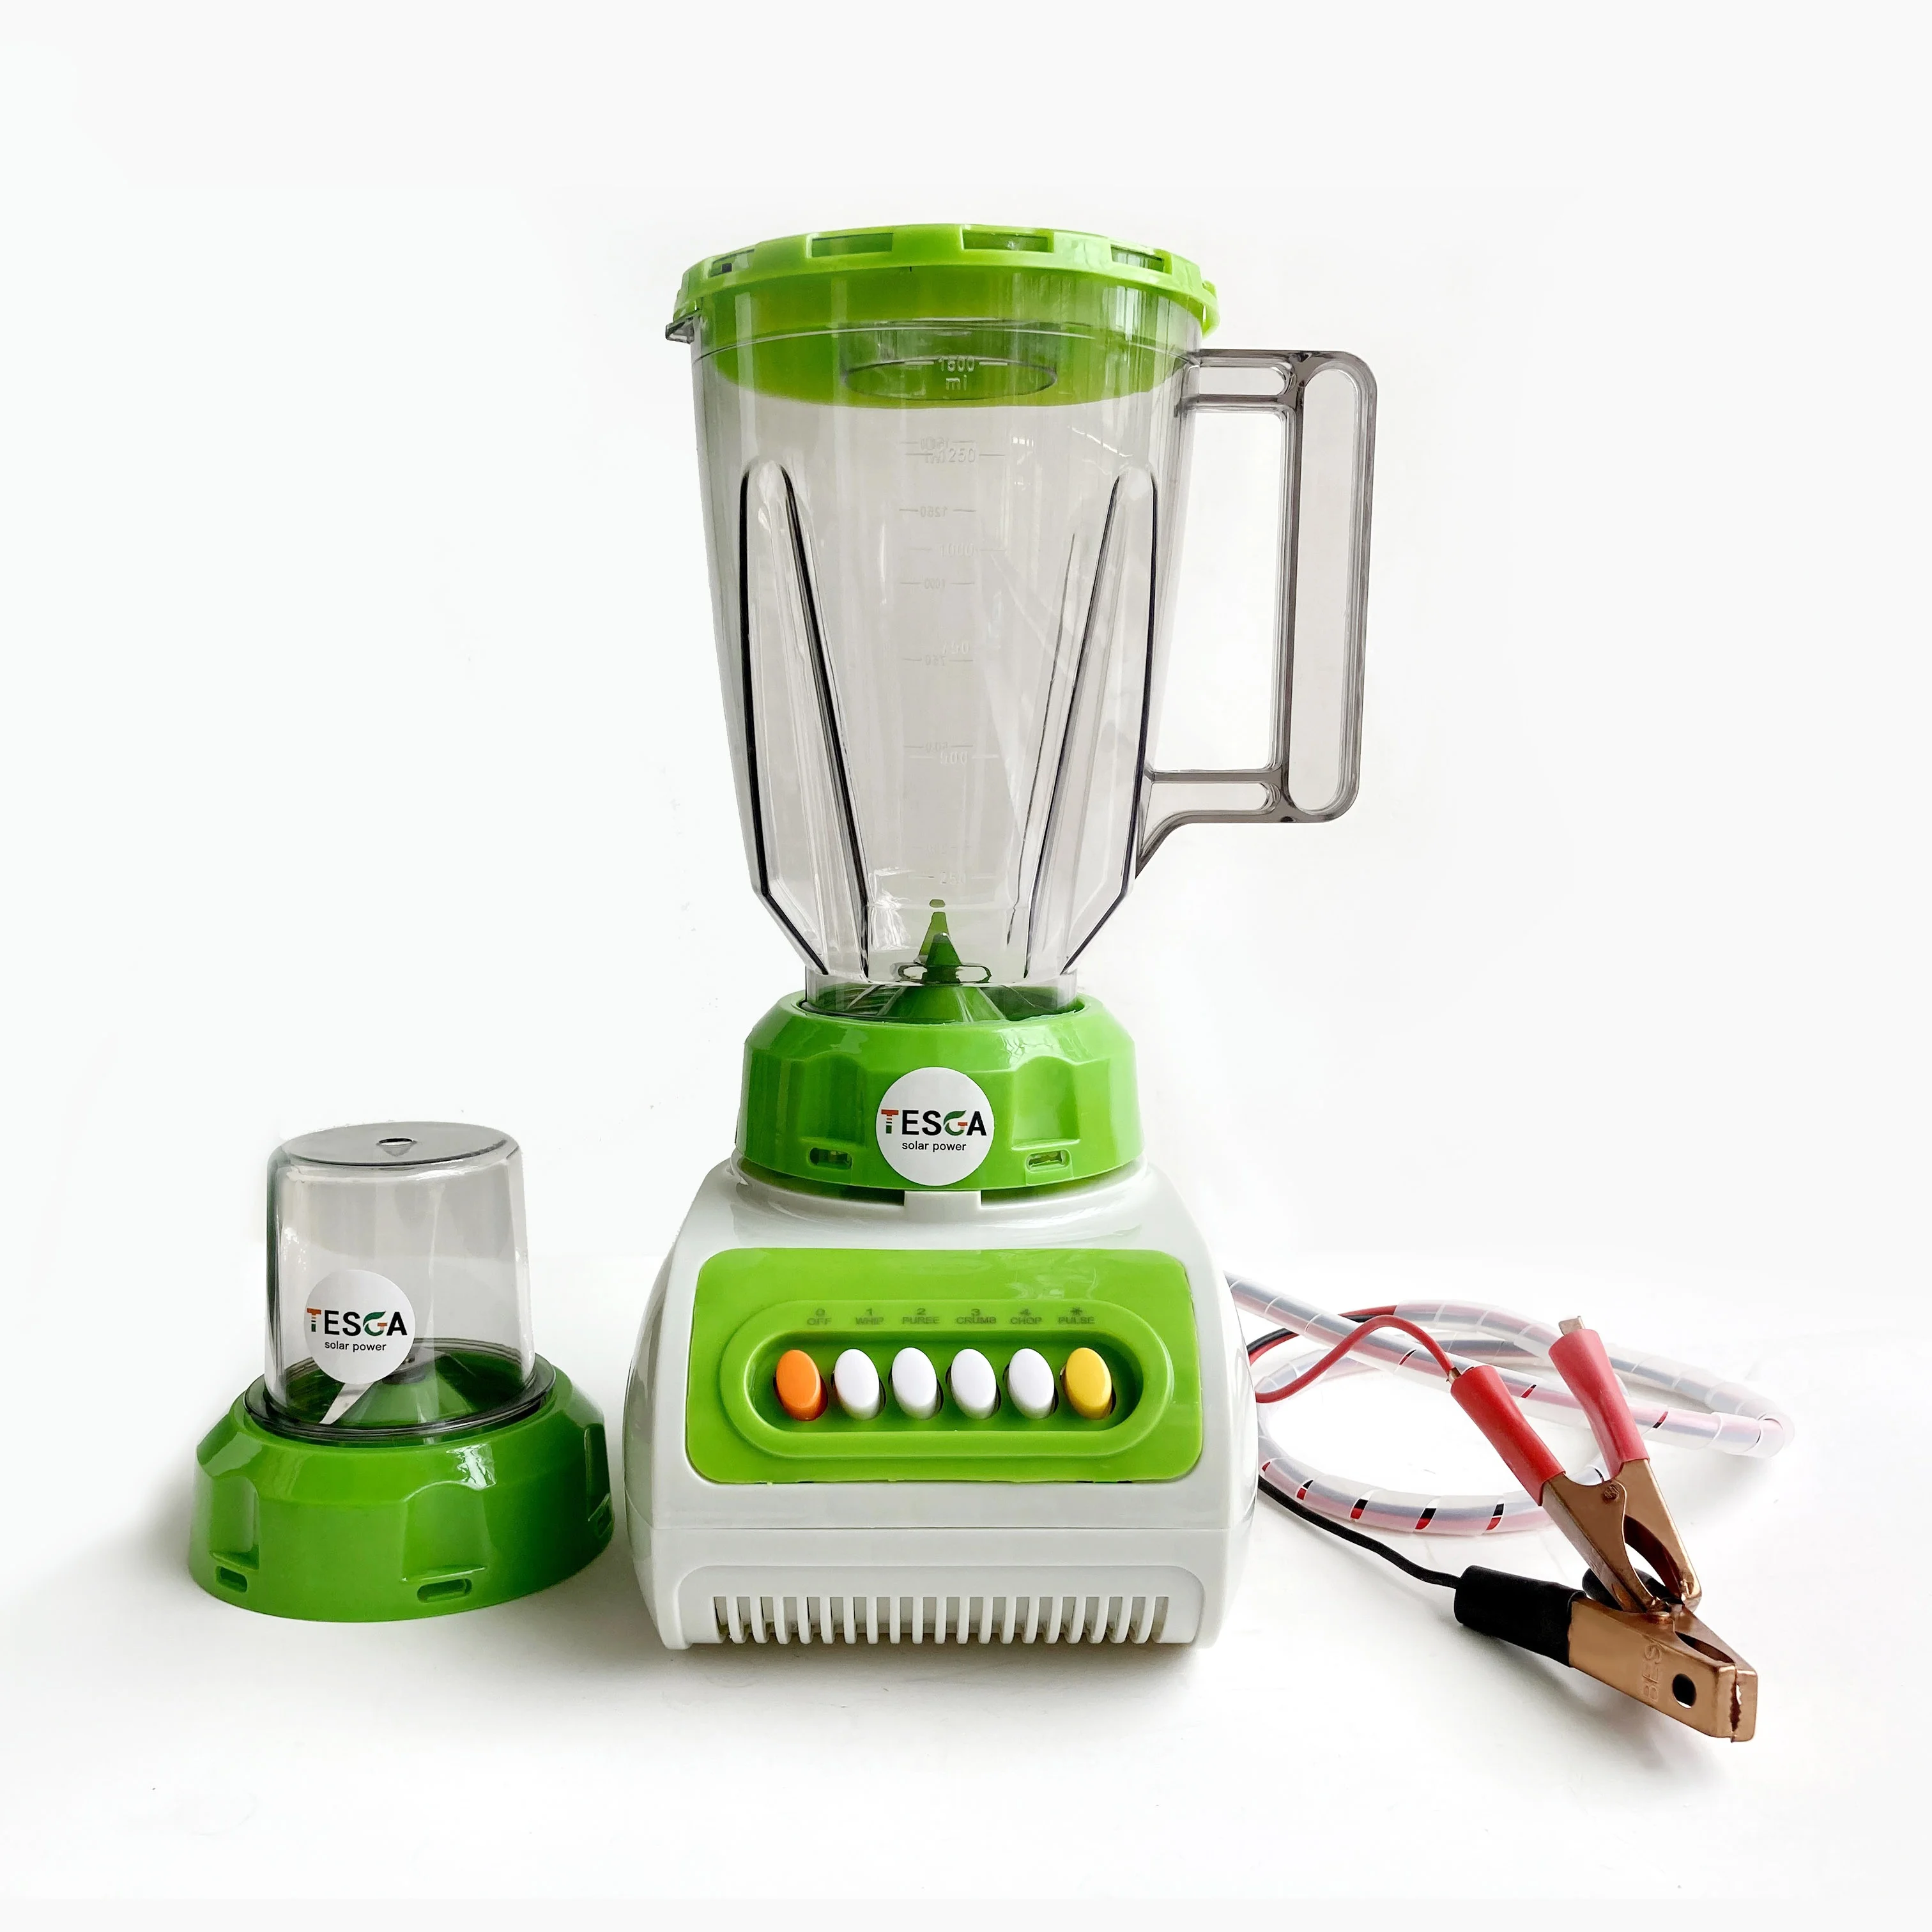 Wholesale 12v blender portable blender cooking machine household juicer fruit mixer 1500ml body with mill battery 12v From m.alibaba.com